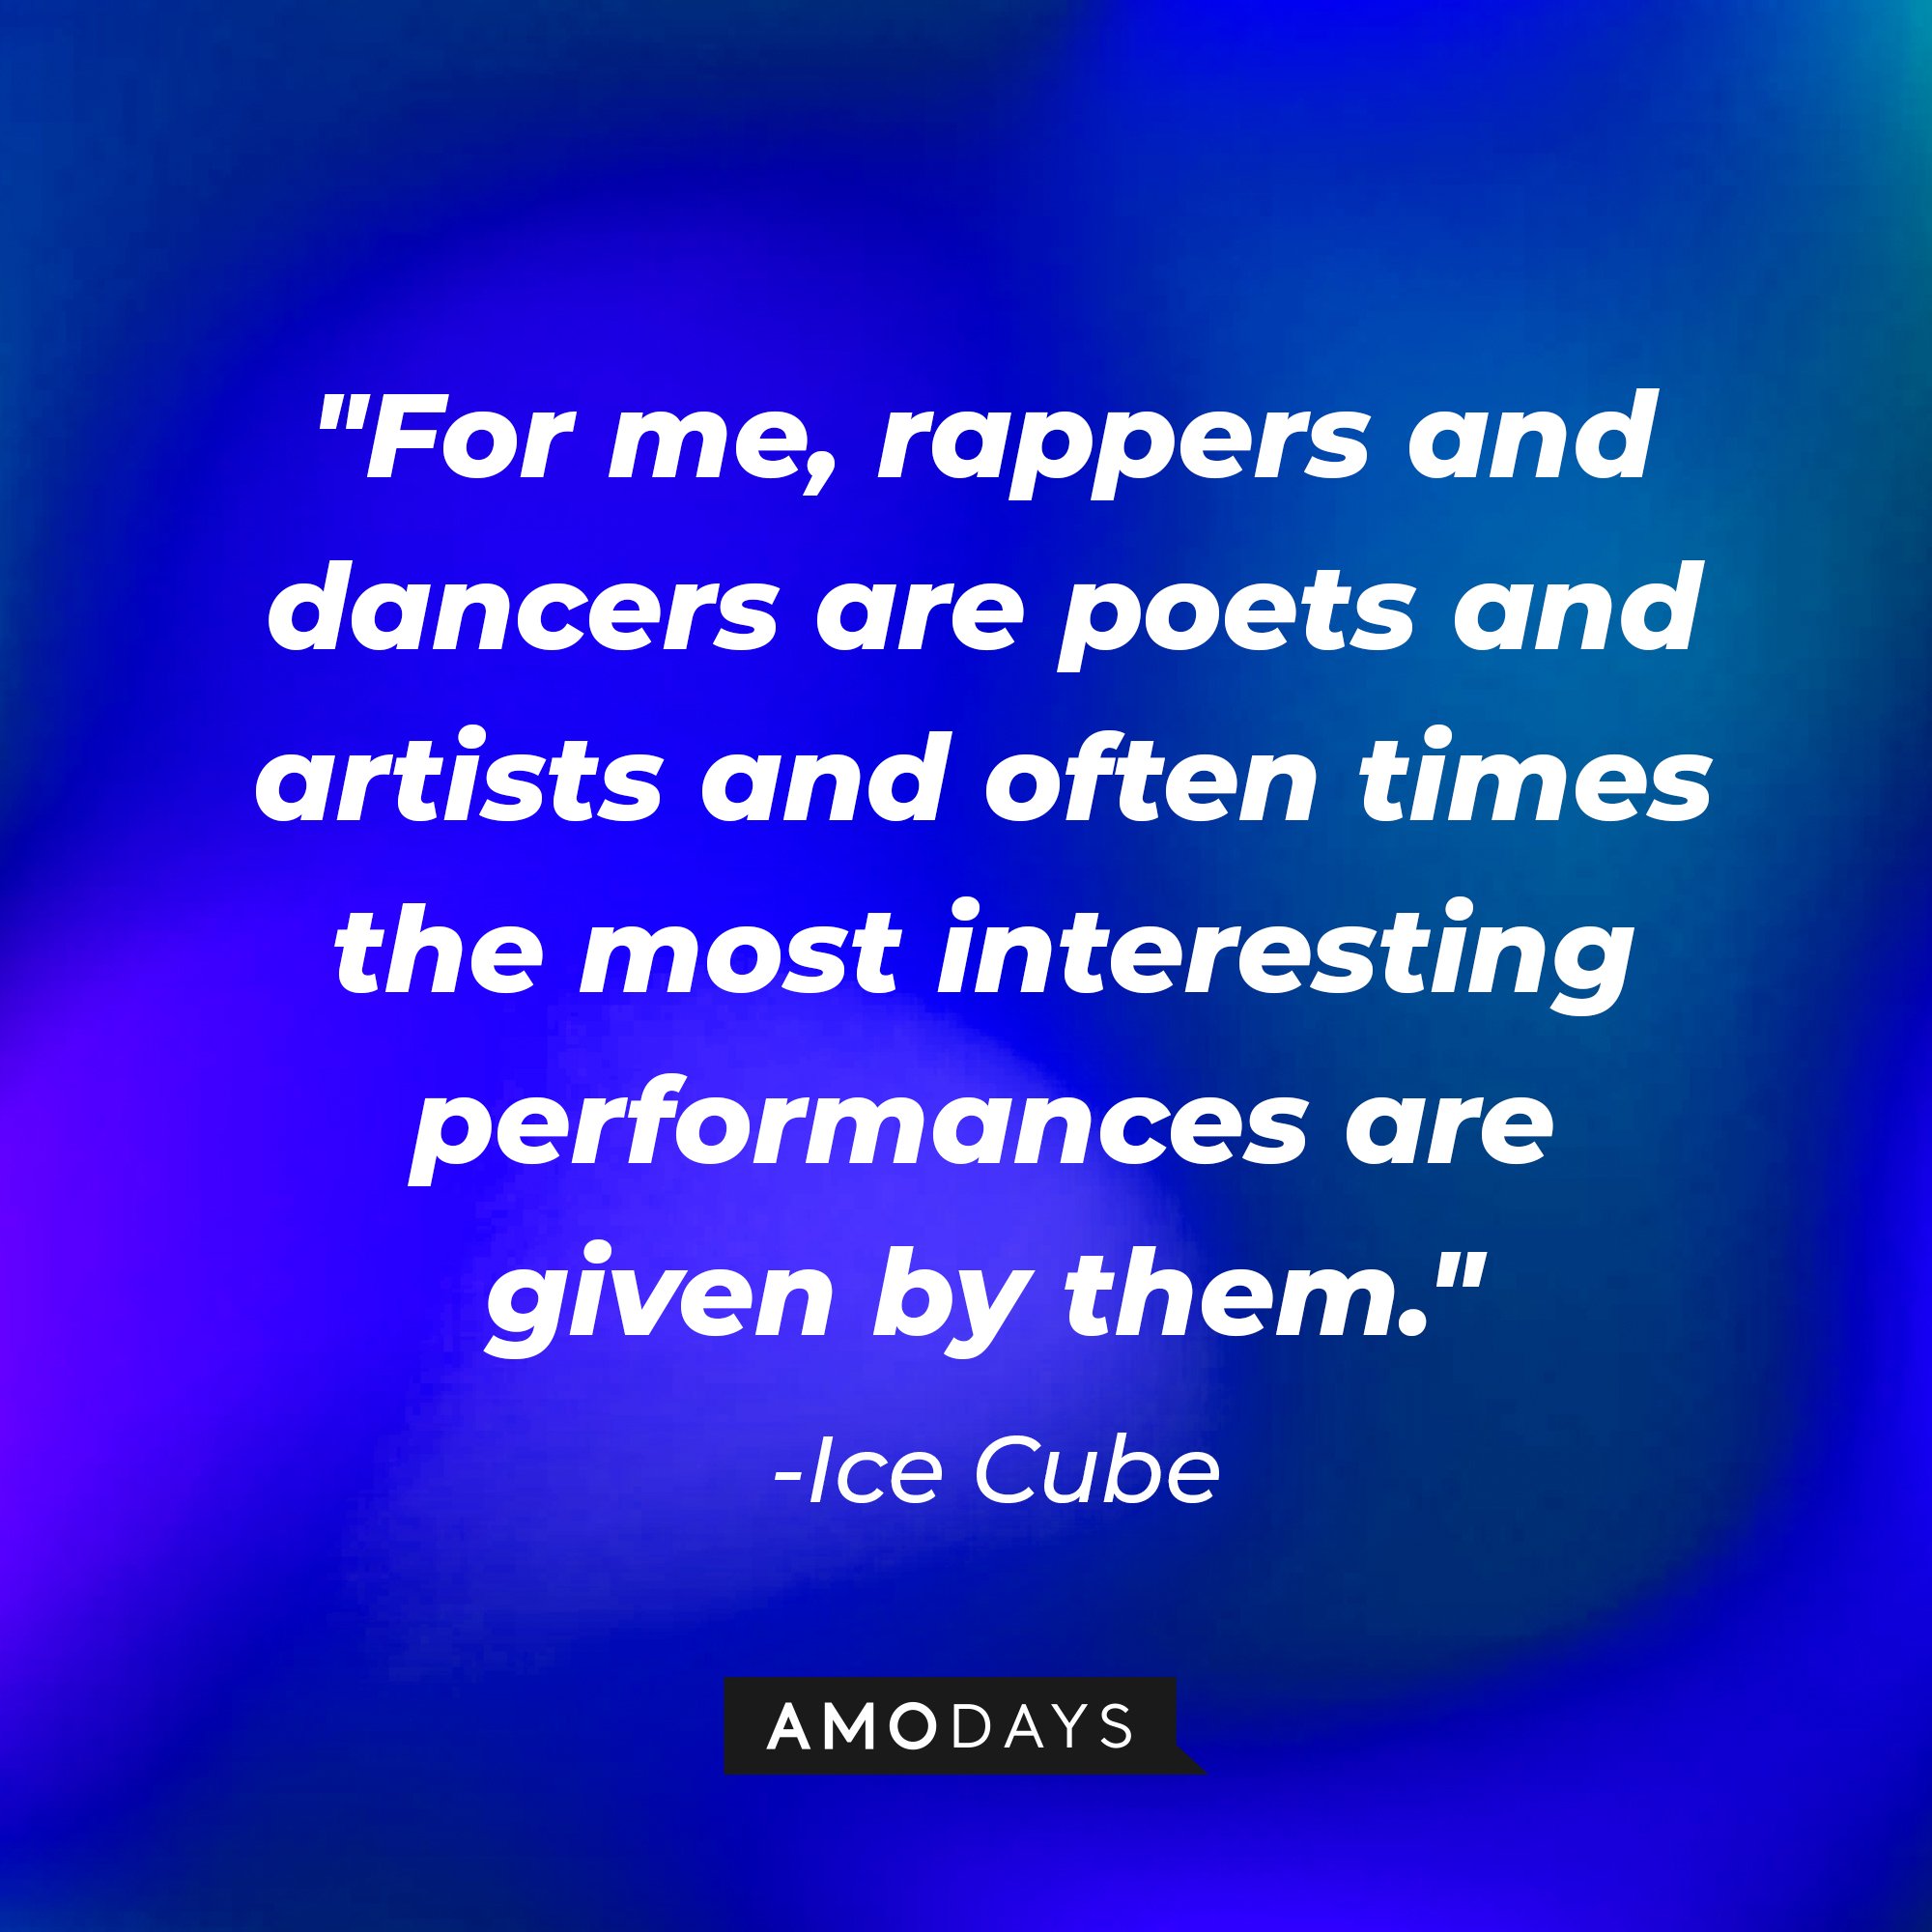 Ice Cube's quote: "For me, rappers and dancers are poets and artists and often times the most interesting performances are given by them." — Ice Cube | Image: AmoDays